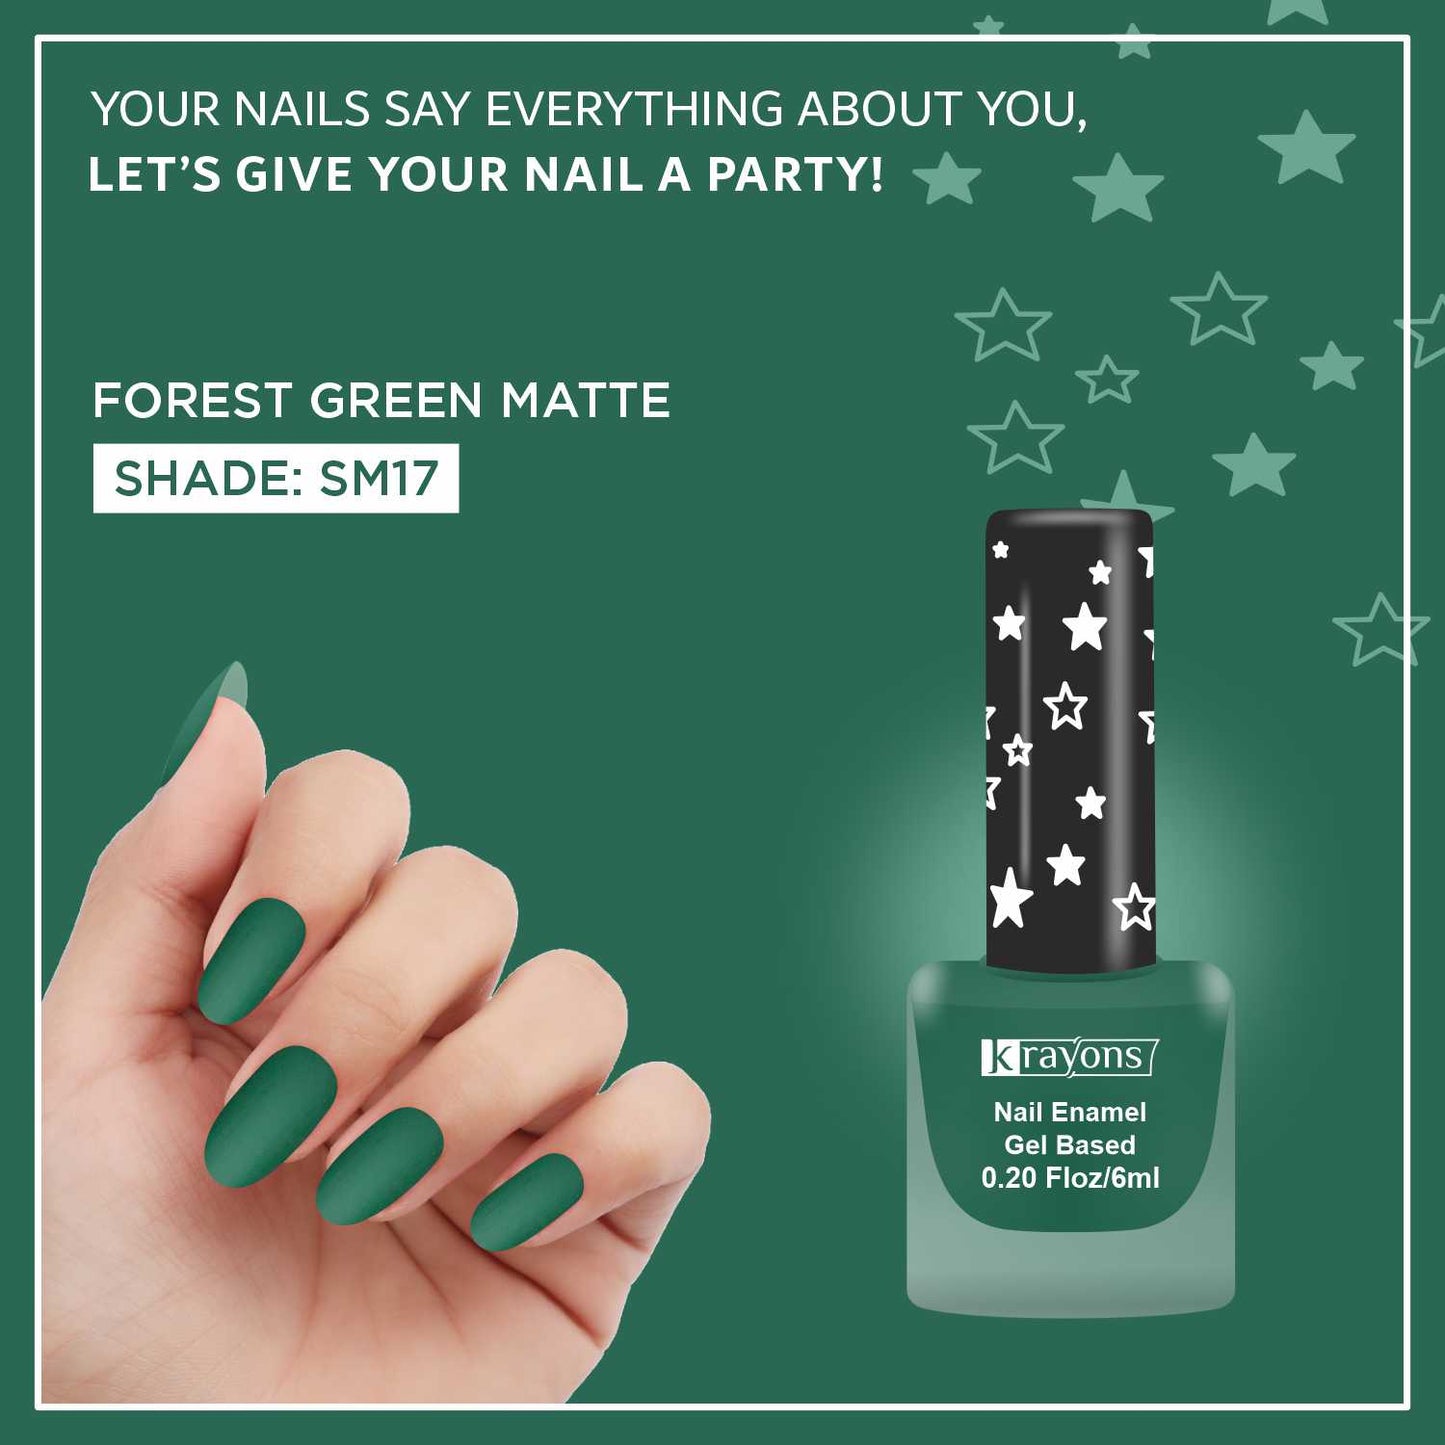 Krayons Cute Super Matte Finish Nail Enamel, Quick Dry, Smooth Finish, LongLasting, Forest Green, 6ml